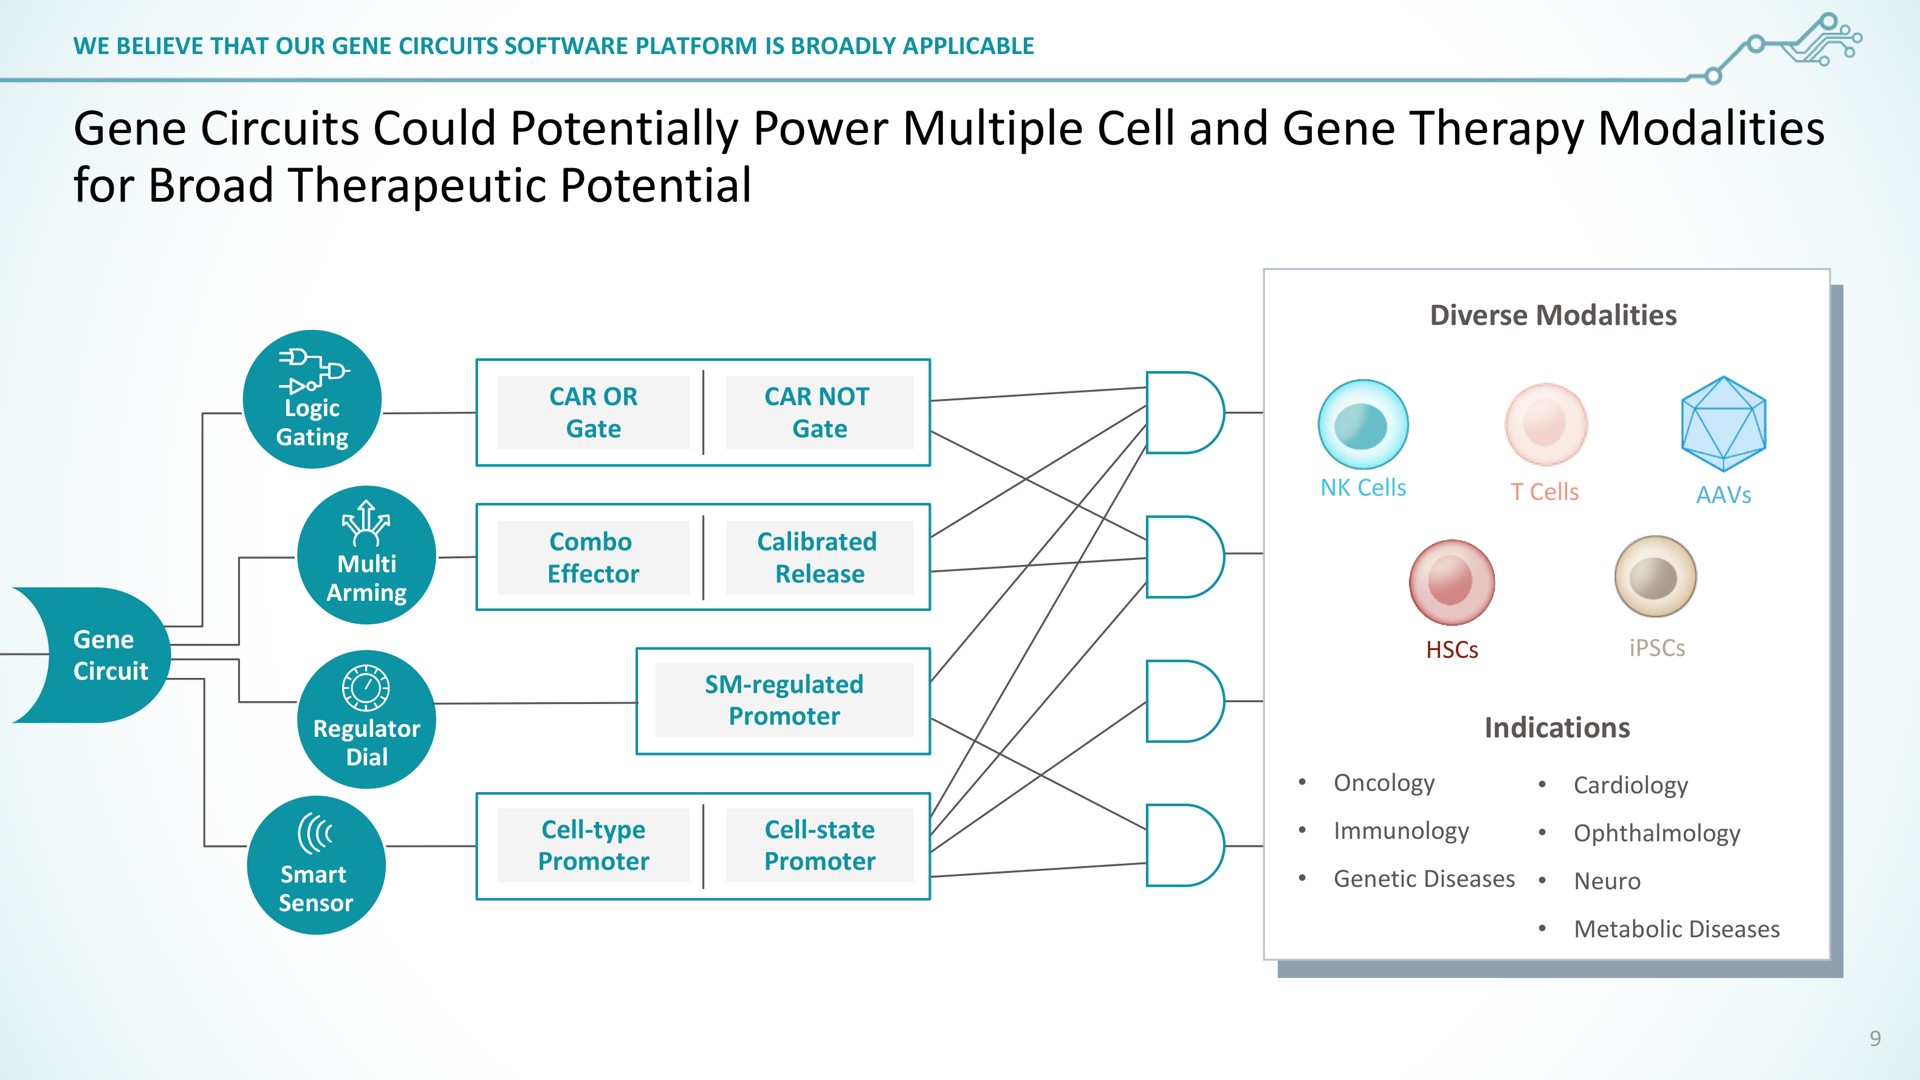 gene circuits could potentially power multiple cell and gene therapy modalities for broad therapeutic potential | SentiBio